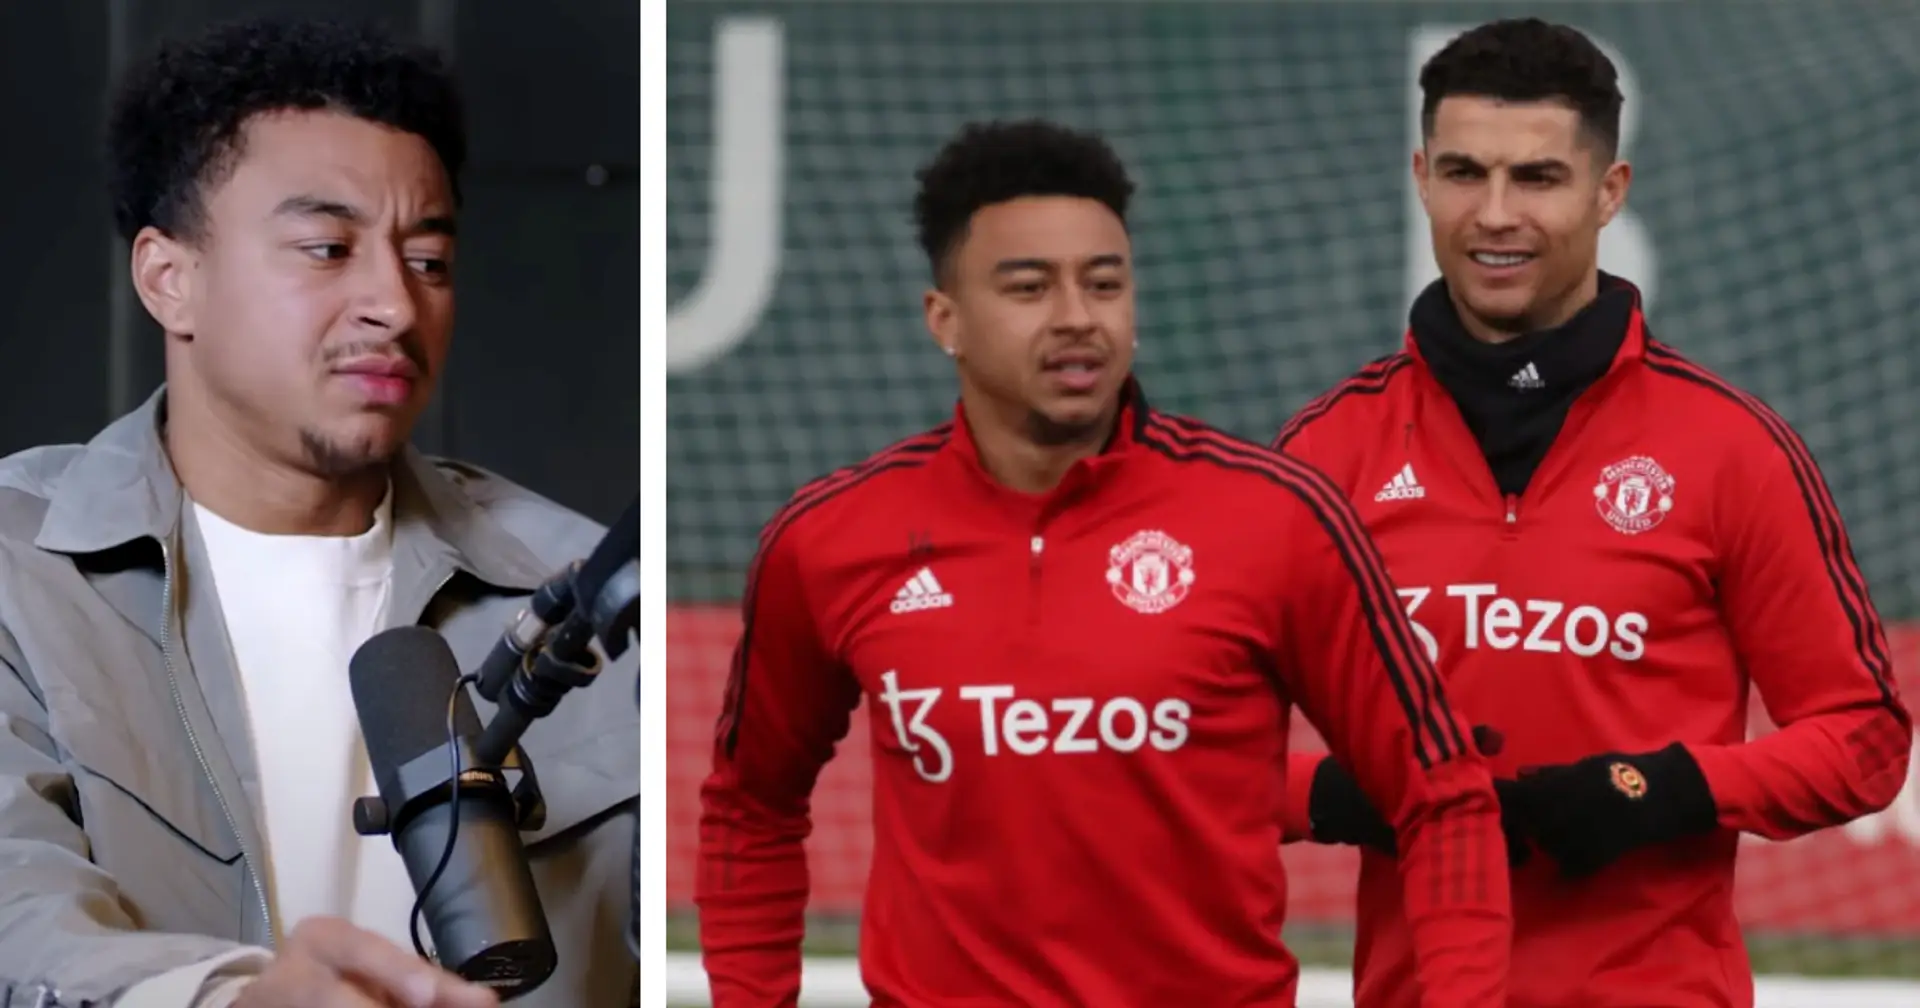 'You want best food, swimming pool, jacuzzi and sauna': Lingard agrees with Ronaldo on state of United facilities